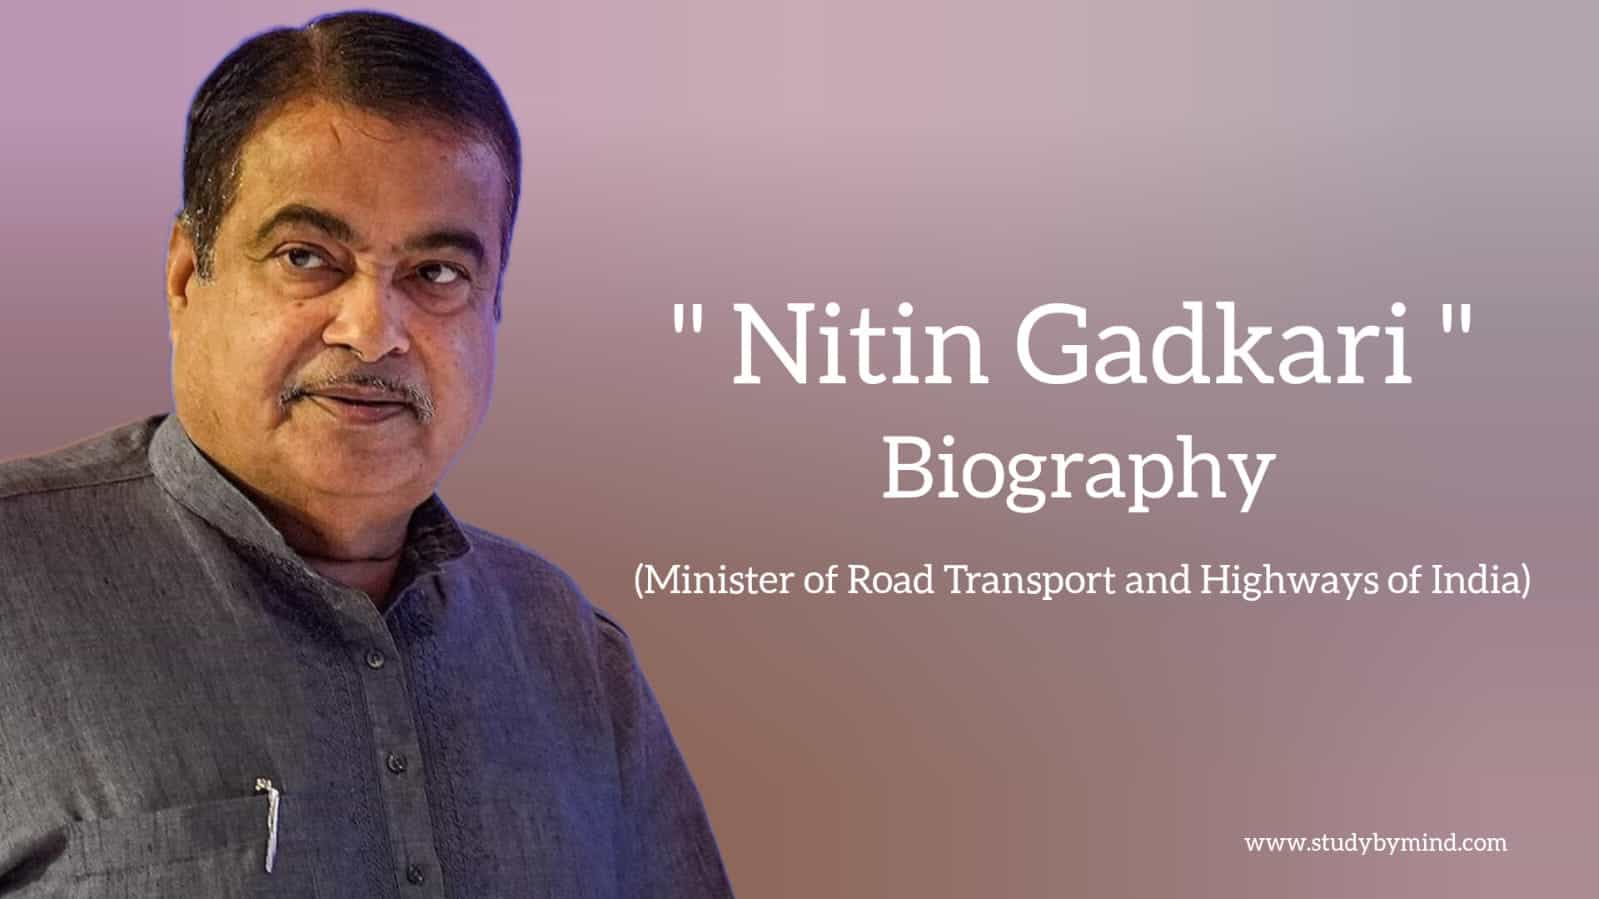 You are currently viewing Nitin gadkari biography in english (Minister of Road Transport and Highways in India)